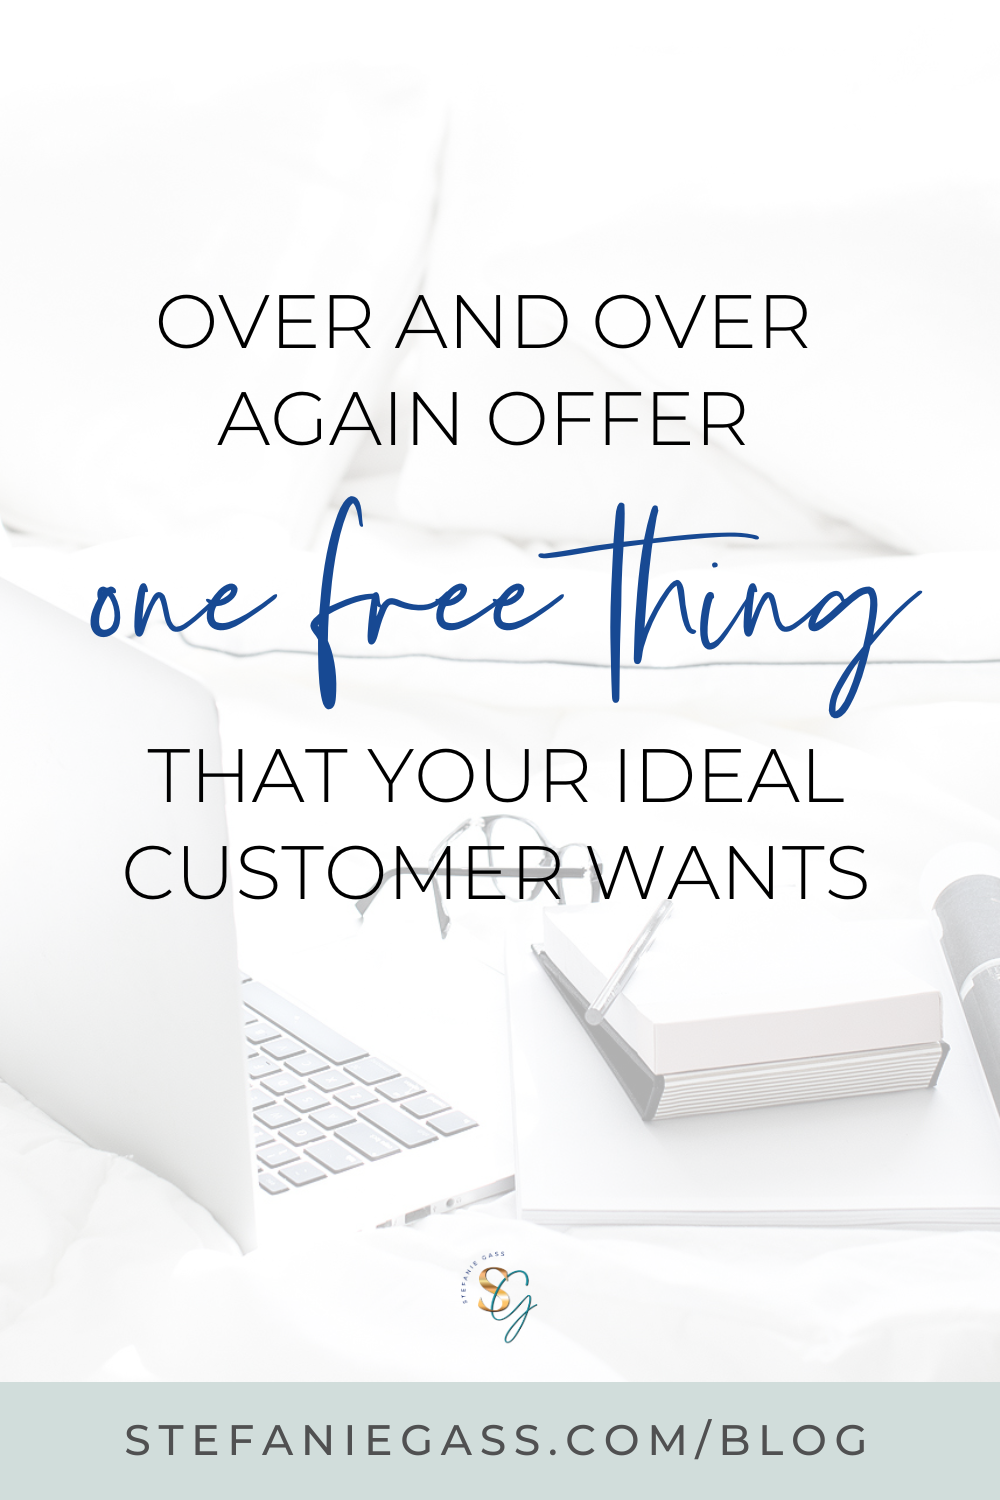 Stefanie Gass Quote:  Over and over again offer one free thing that your ideal customer wants.